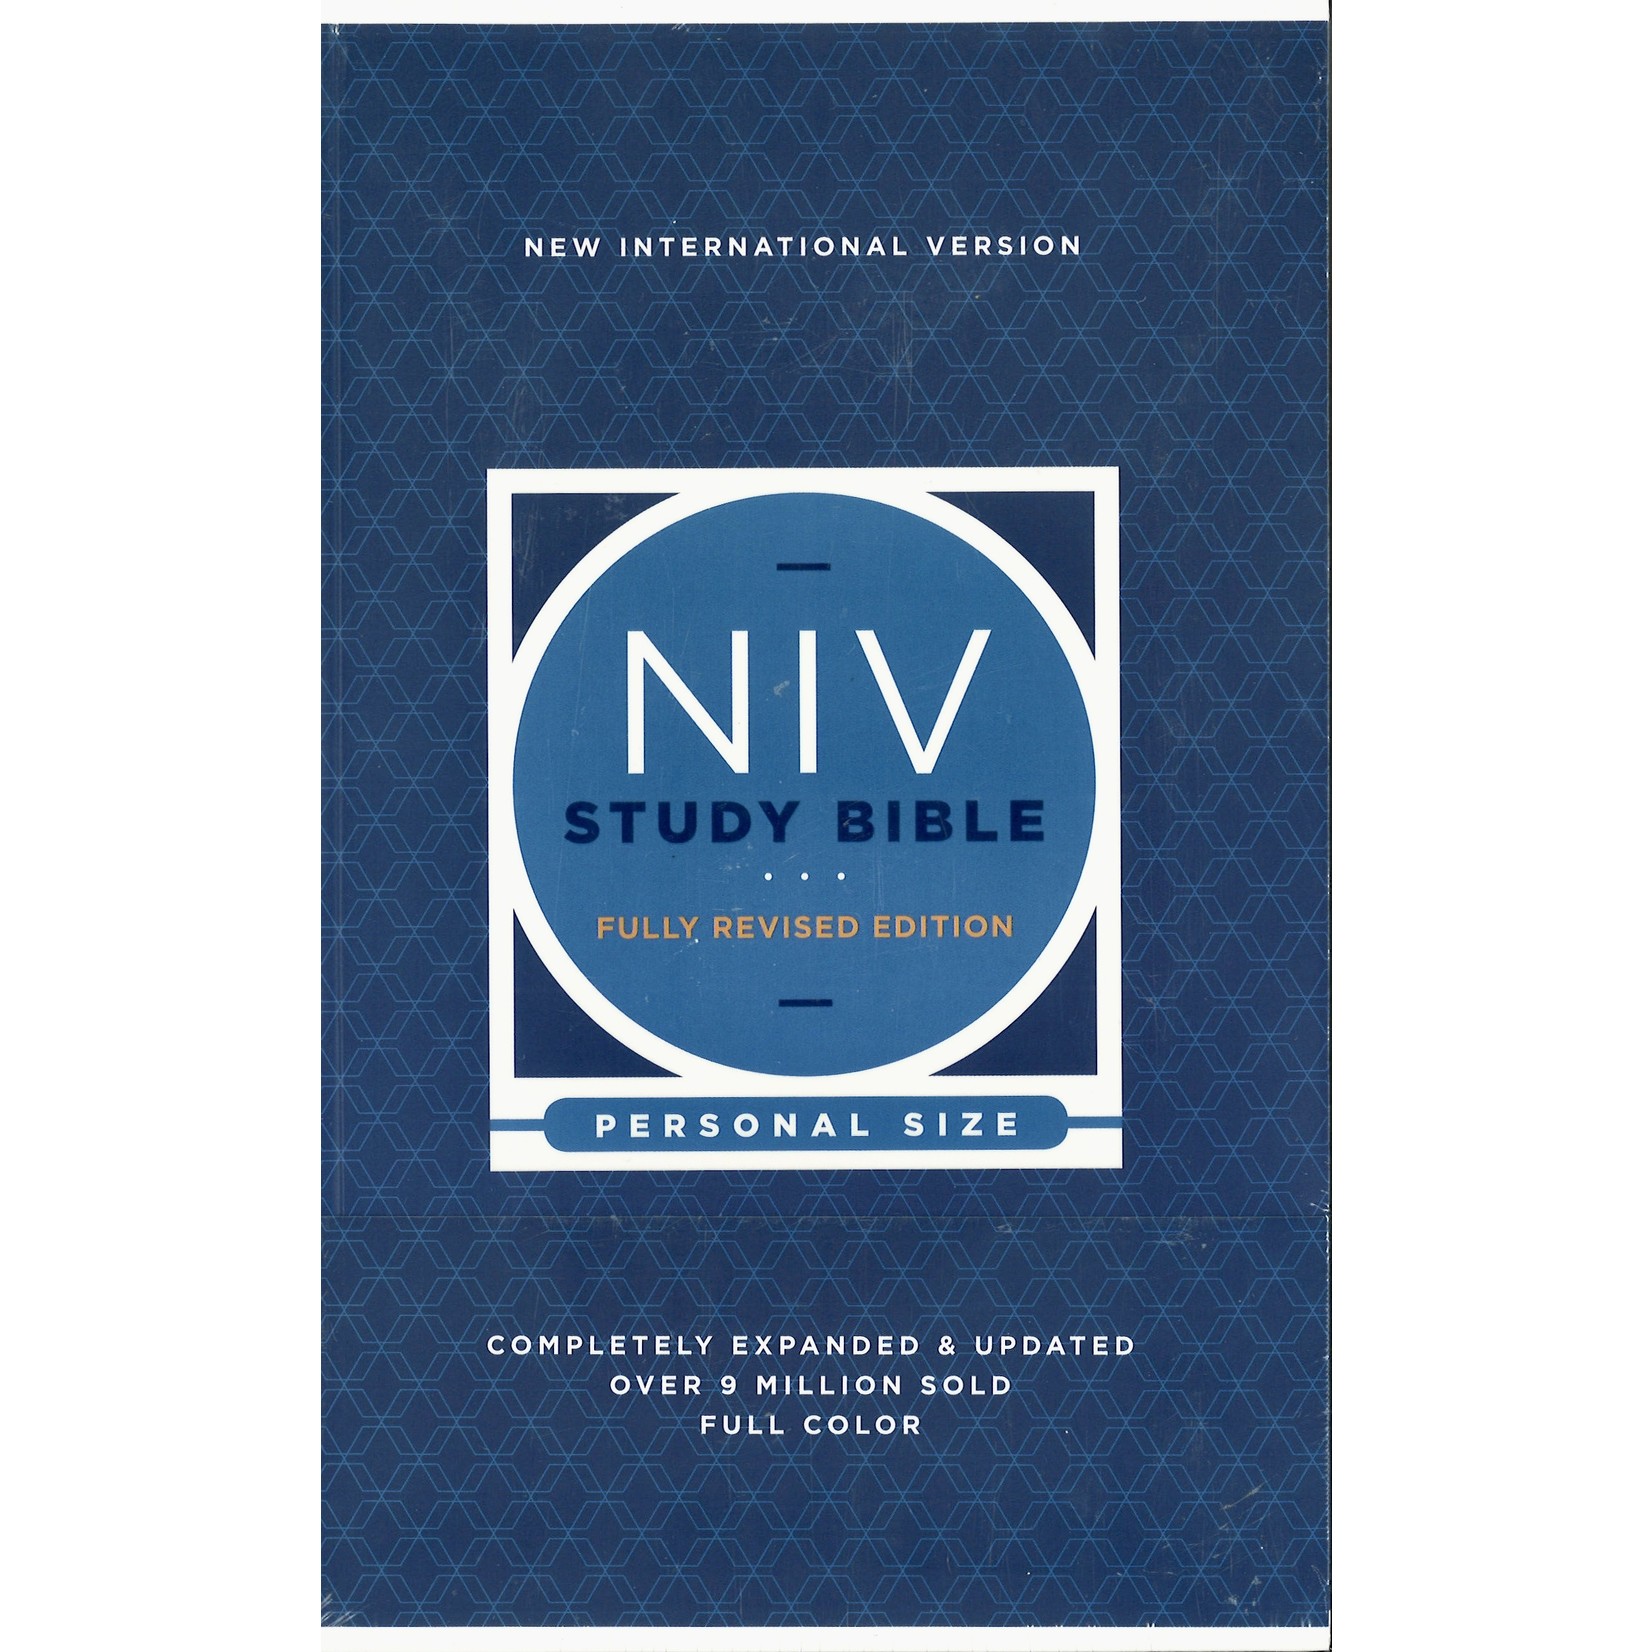 NIV STUDY BIBLE FULLY REVISED VERSION PERSONAL SIZE